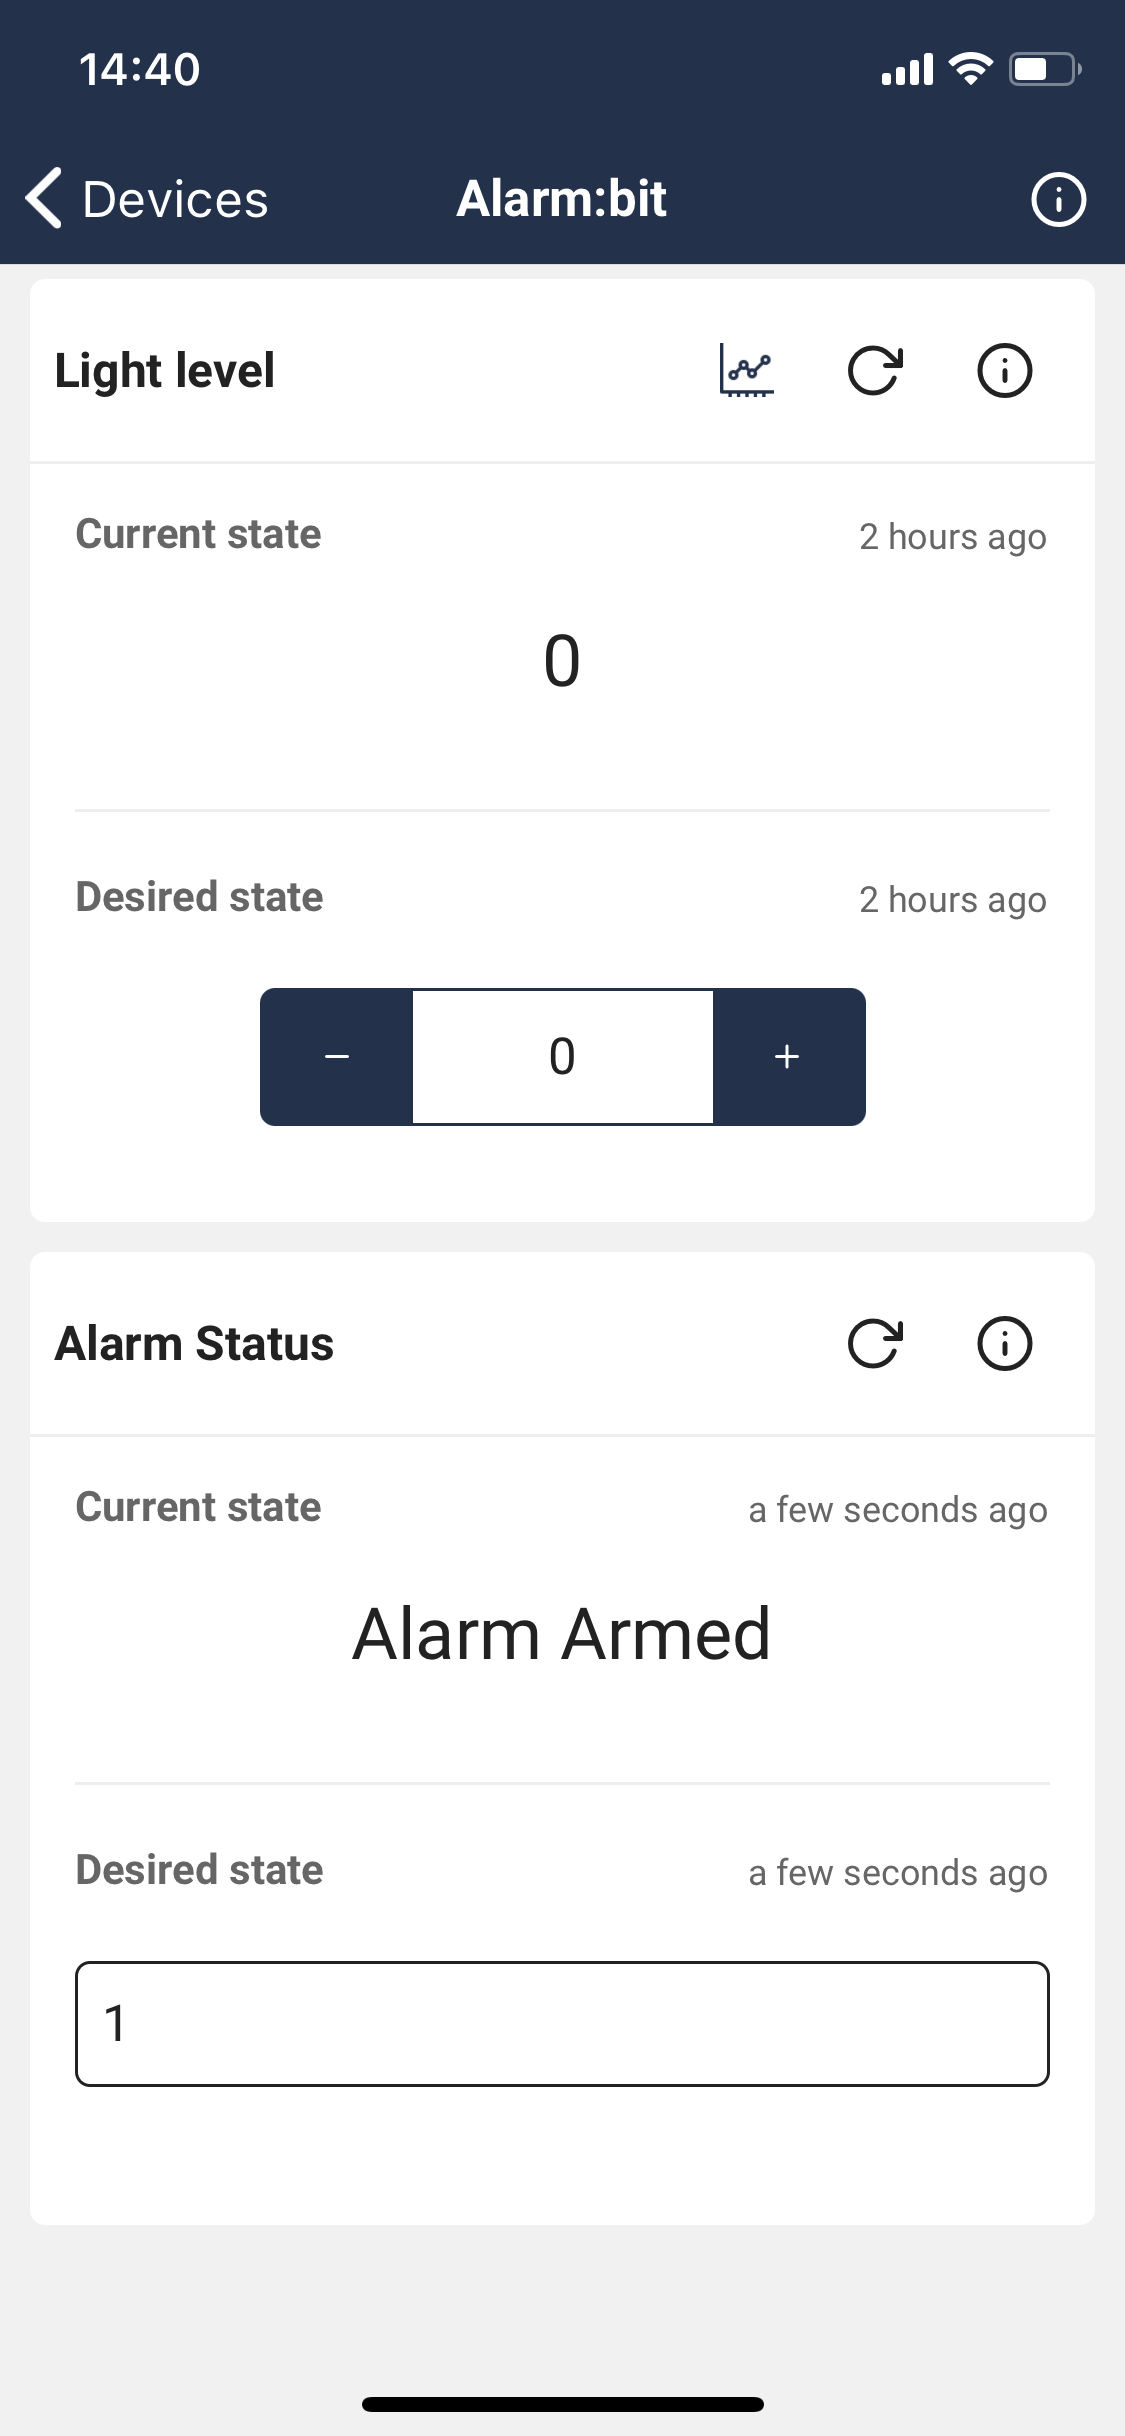 Wappsto smartphone APP device view showing light level and alarm status with alarm status armed